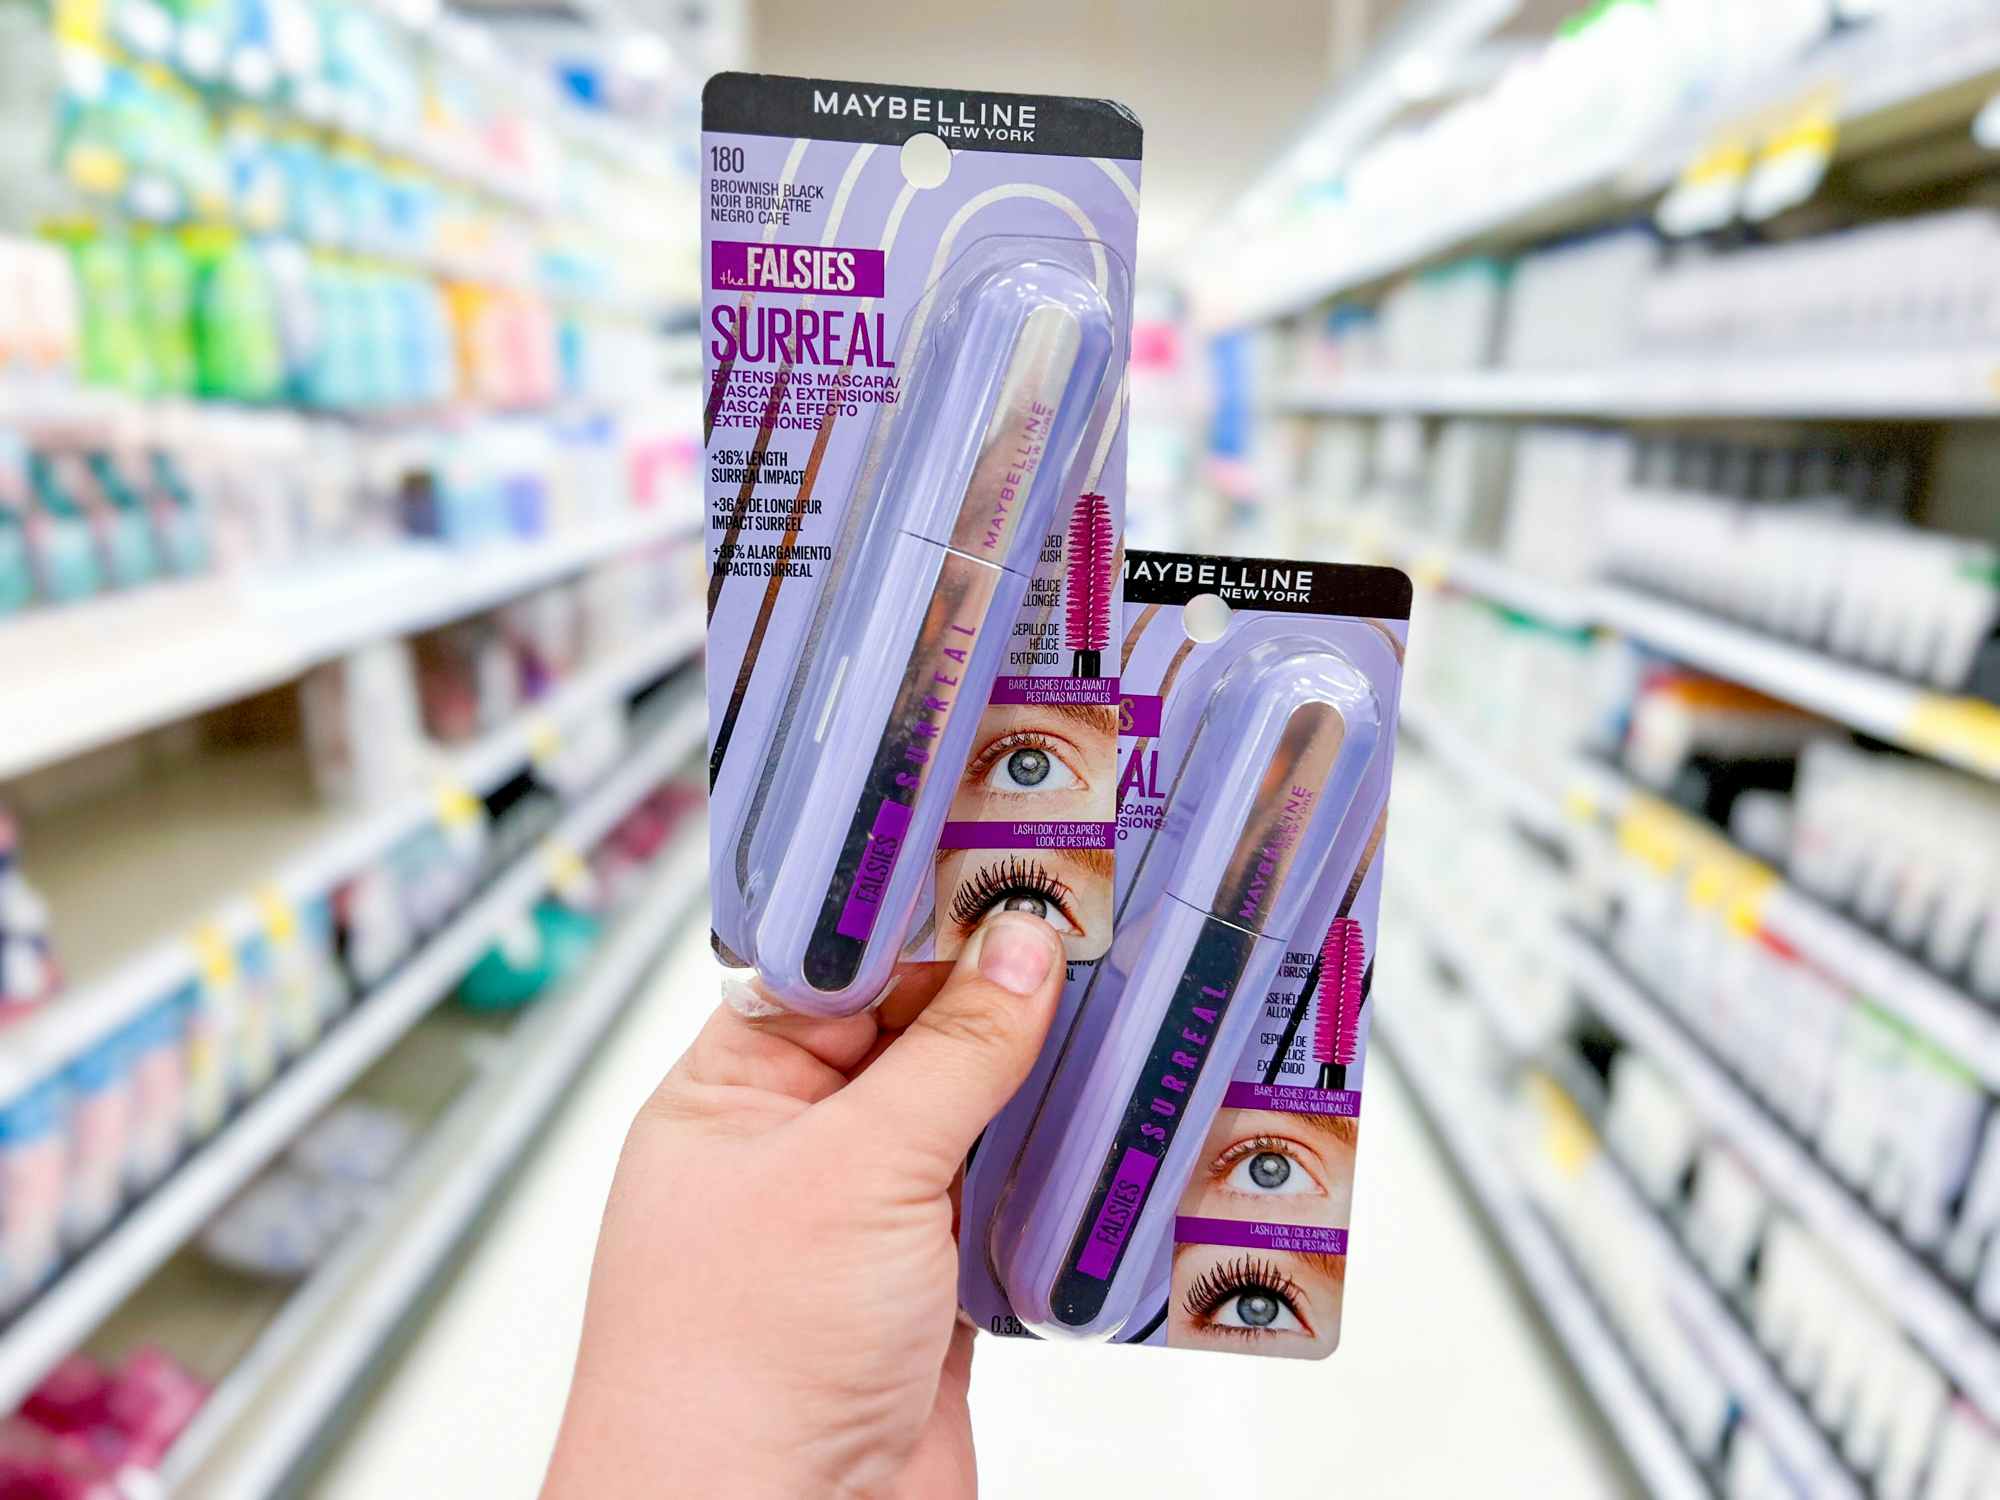 Surreal NEW Falsies Krazy Coupon Lady at - for Mascara $9.99 Target: The Extensions